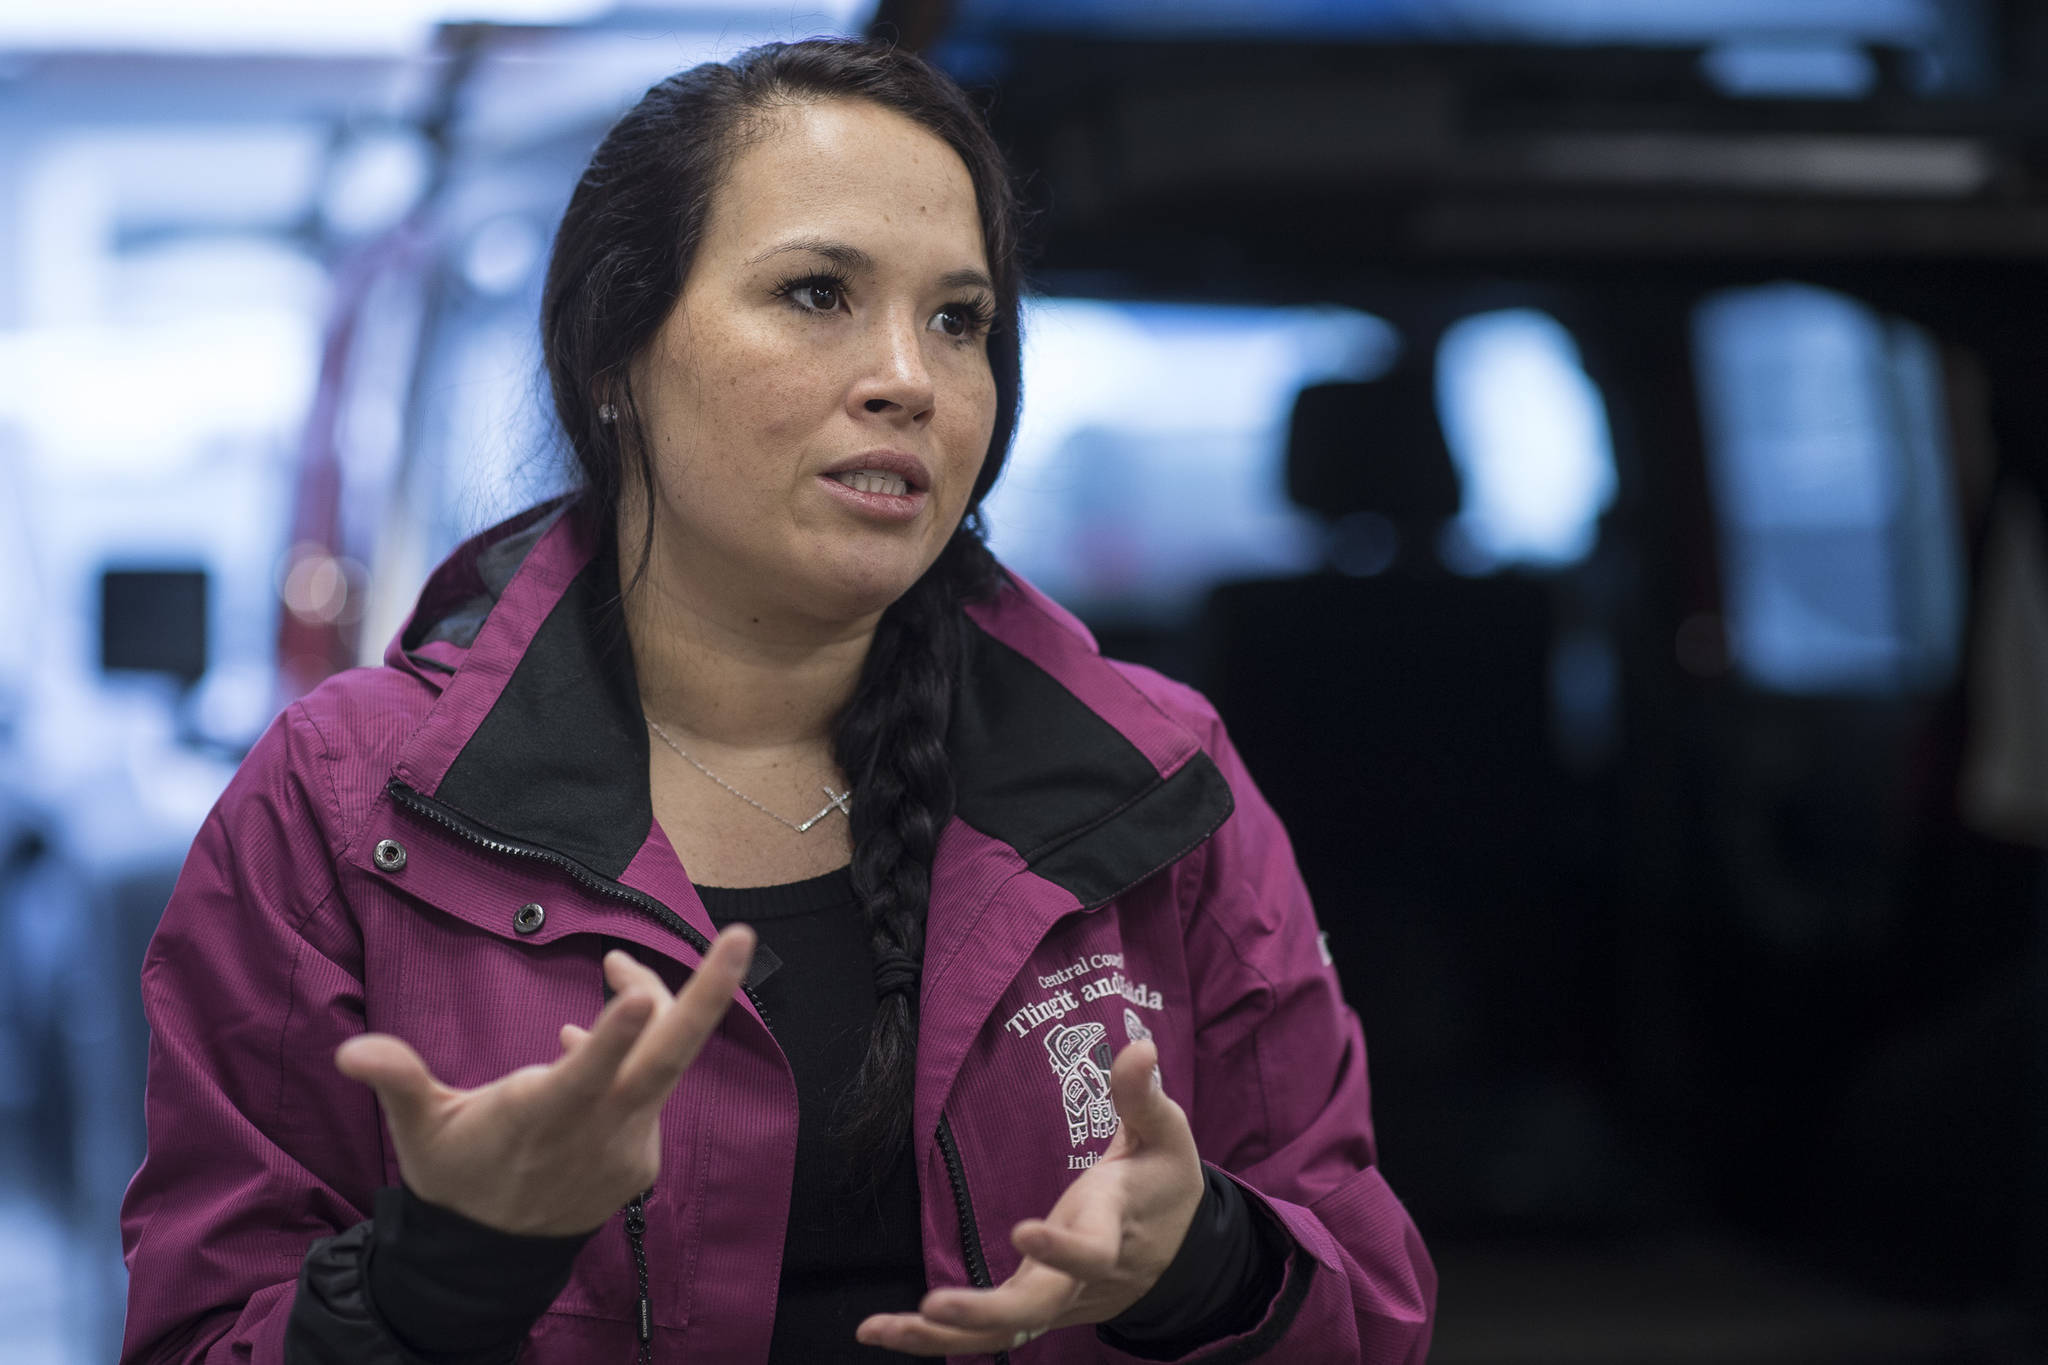 Emily Edenshaw, Business and Economic Development Director for the Central Council of the Tlingit and Haida Indian Tribes of Alaska, speaks about the council’s wishes to create jobs for their members during an interview at their newest business, Sacred Shine, on Friday, Dec. 21, 2018. (Michael Penn | Juneau Empire File)                                Emily Edenshaw, Business and Economic Development Director for the Central Council of the Tlingit and Haida Indian Tribes of Alaska, speaks about the council’s wishes to create jobs for their members during an interview at their newest business, Sacred Shine, on Friday, Dec. 21, 2018. (Michael Penn | Juneau Empire File)